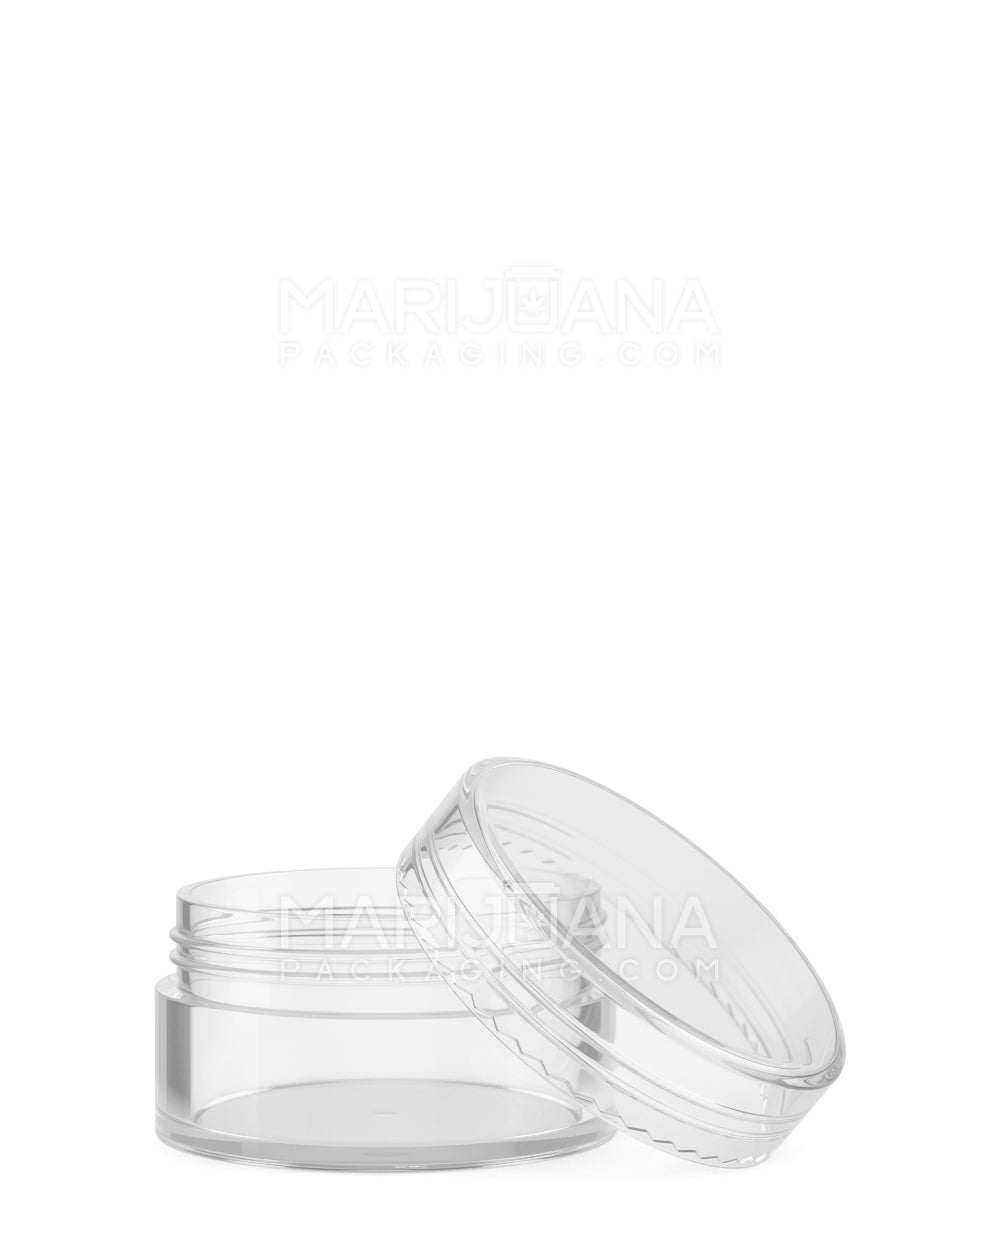 Clear Concentrate Containers w/ Screw Top Cap | 15mL - Plastic | Sample - 1